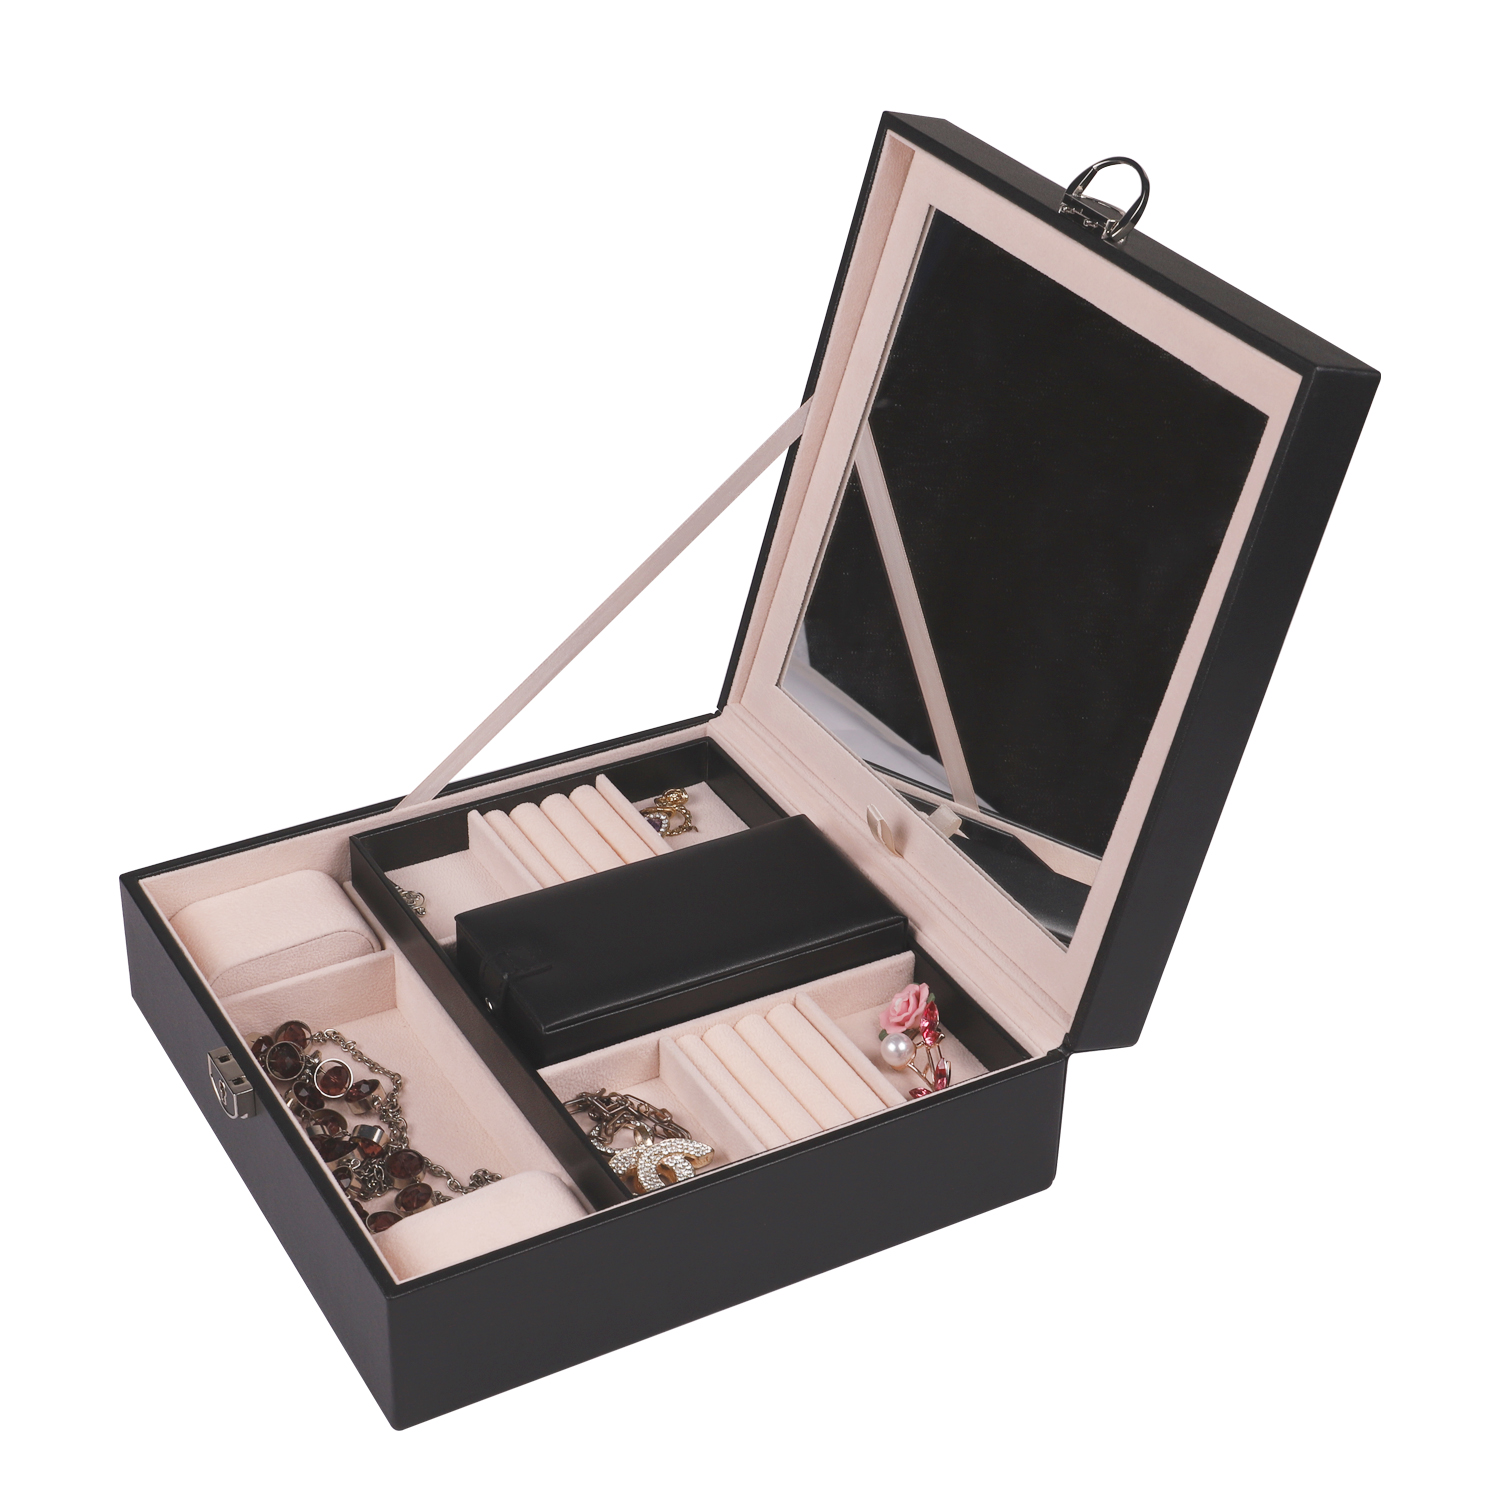 Jewelry Box Organizer for Women Girls, Two Layer Jewelry Display Storage Holder Case for Necklace Earrings Bracelets Rings Watches